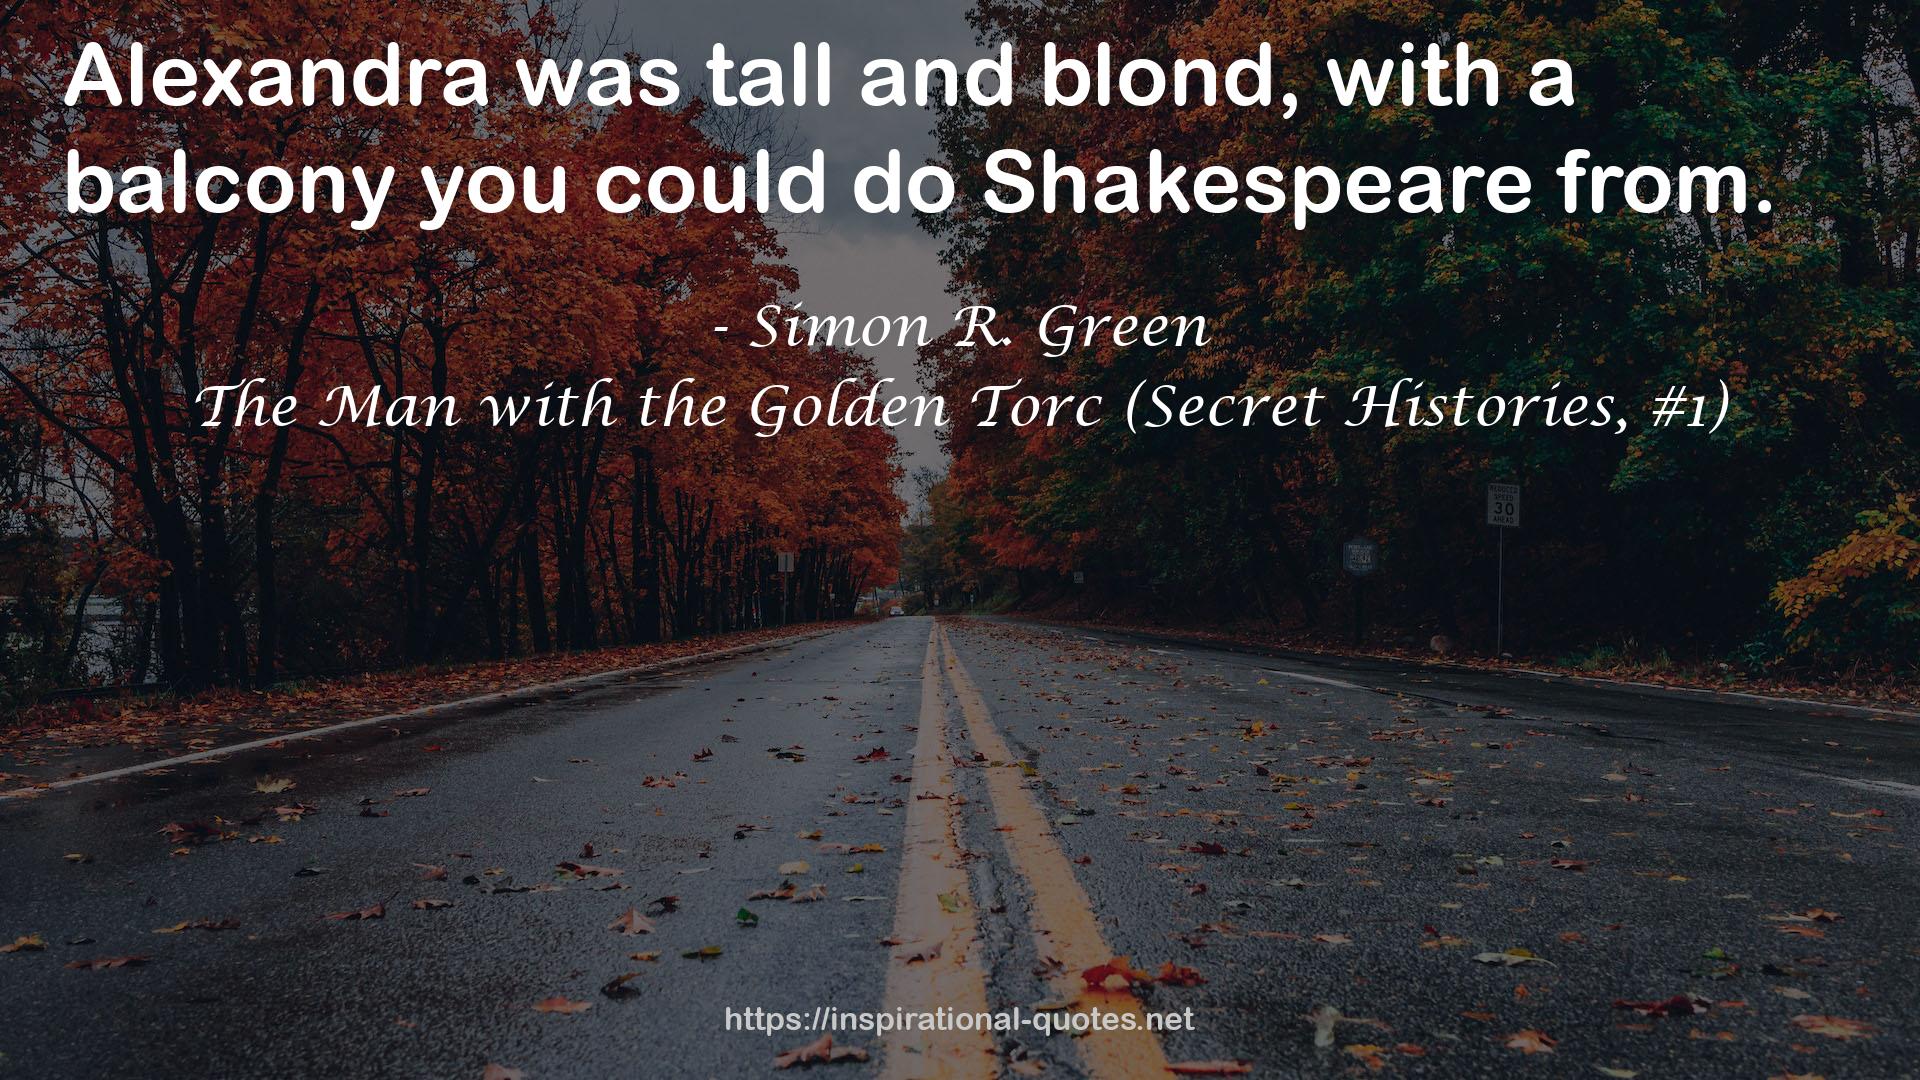 The Man with the Golden Torc (Secret Histories, #1) QUOTES